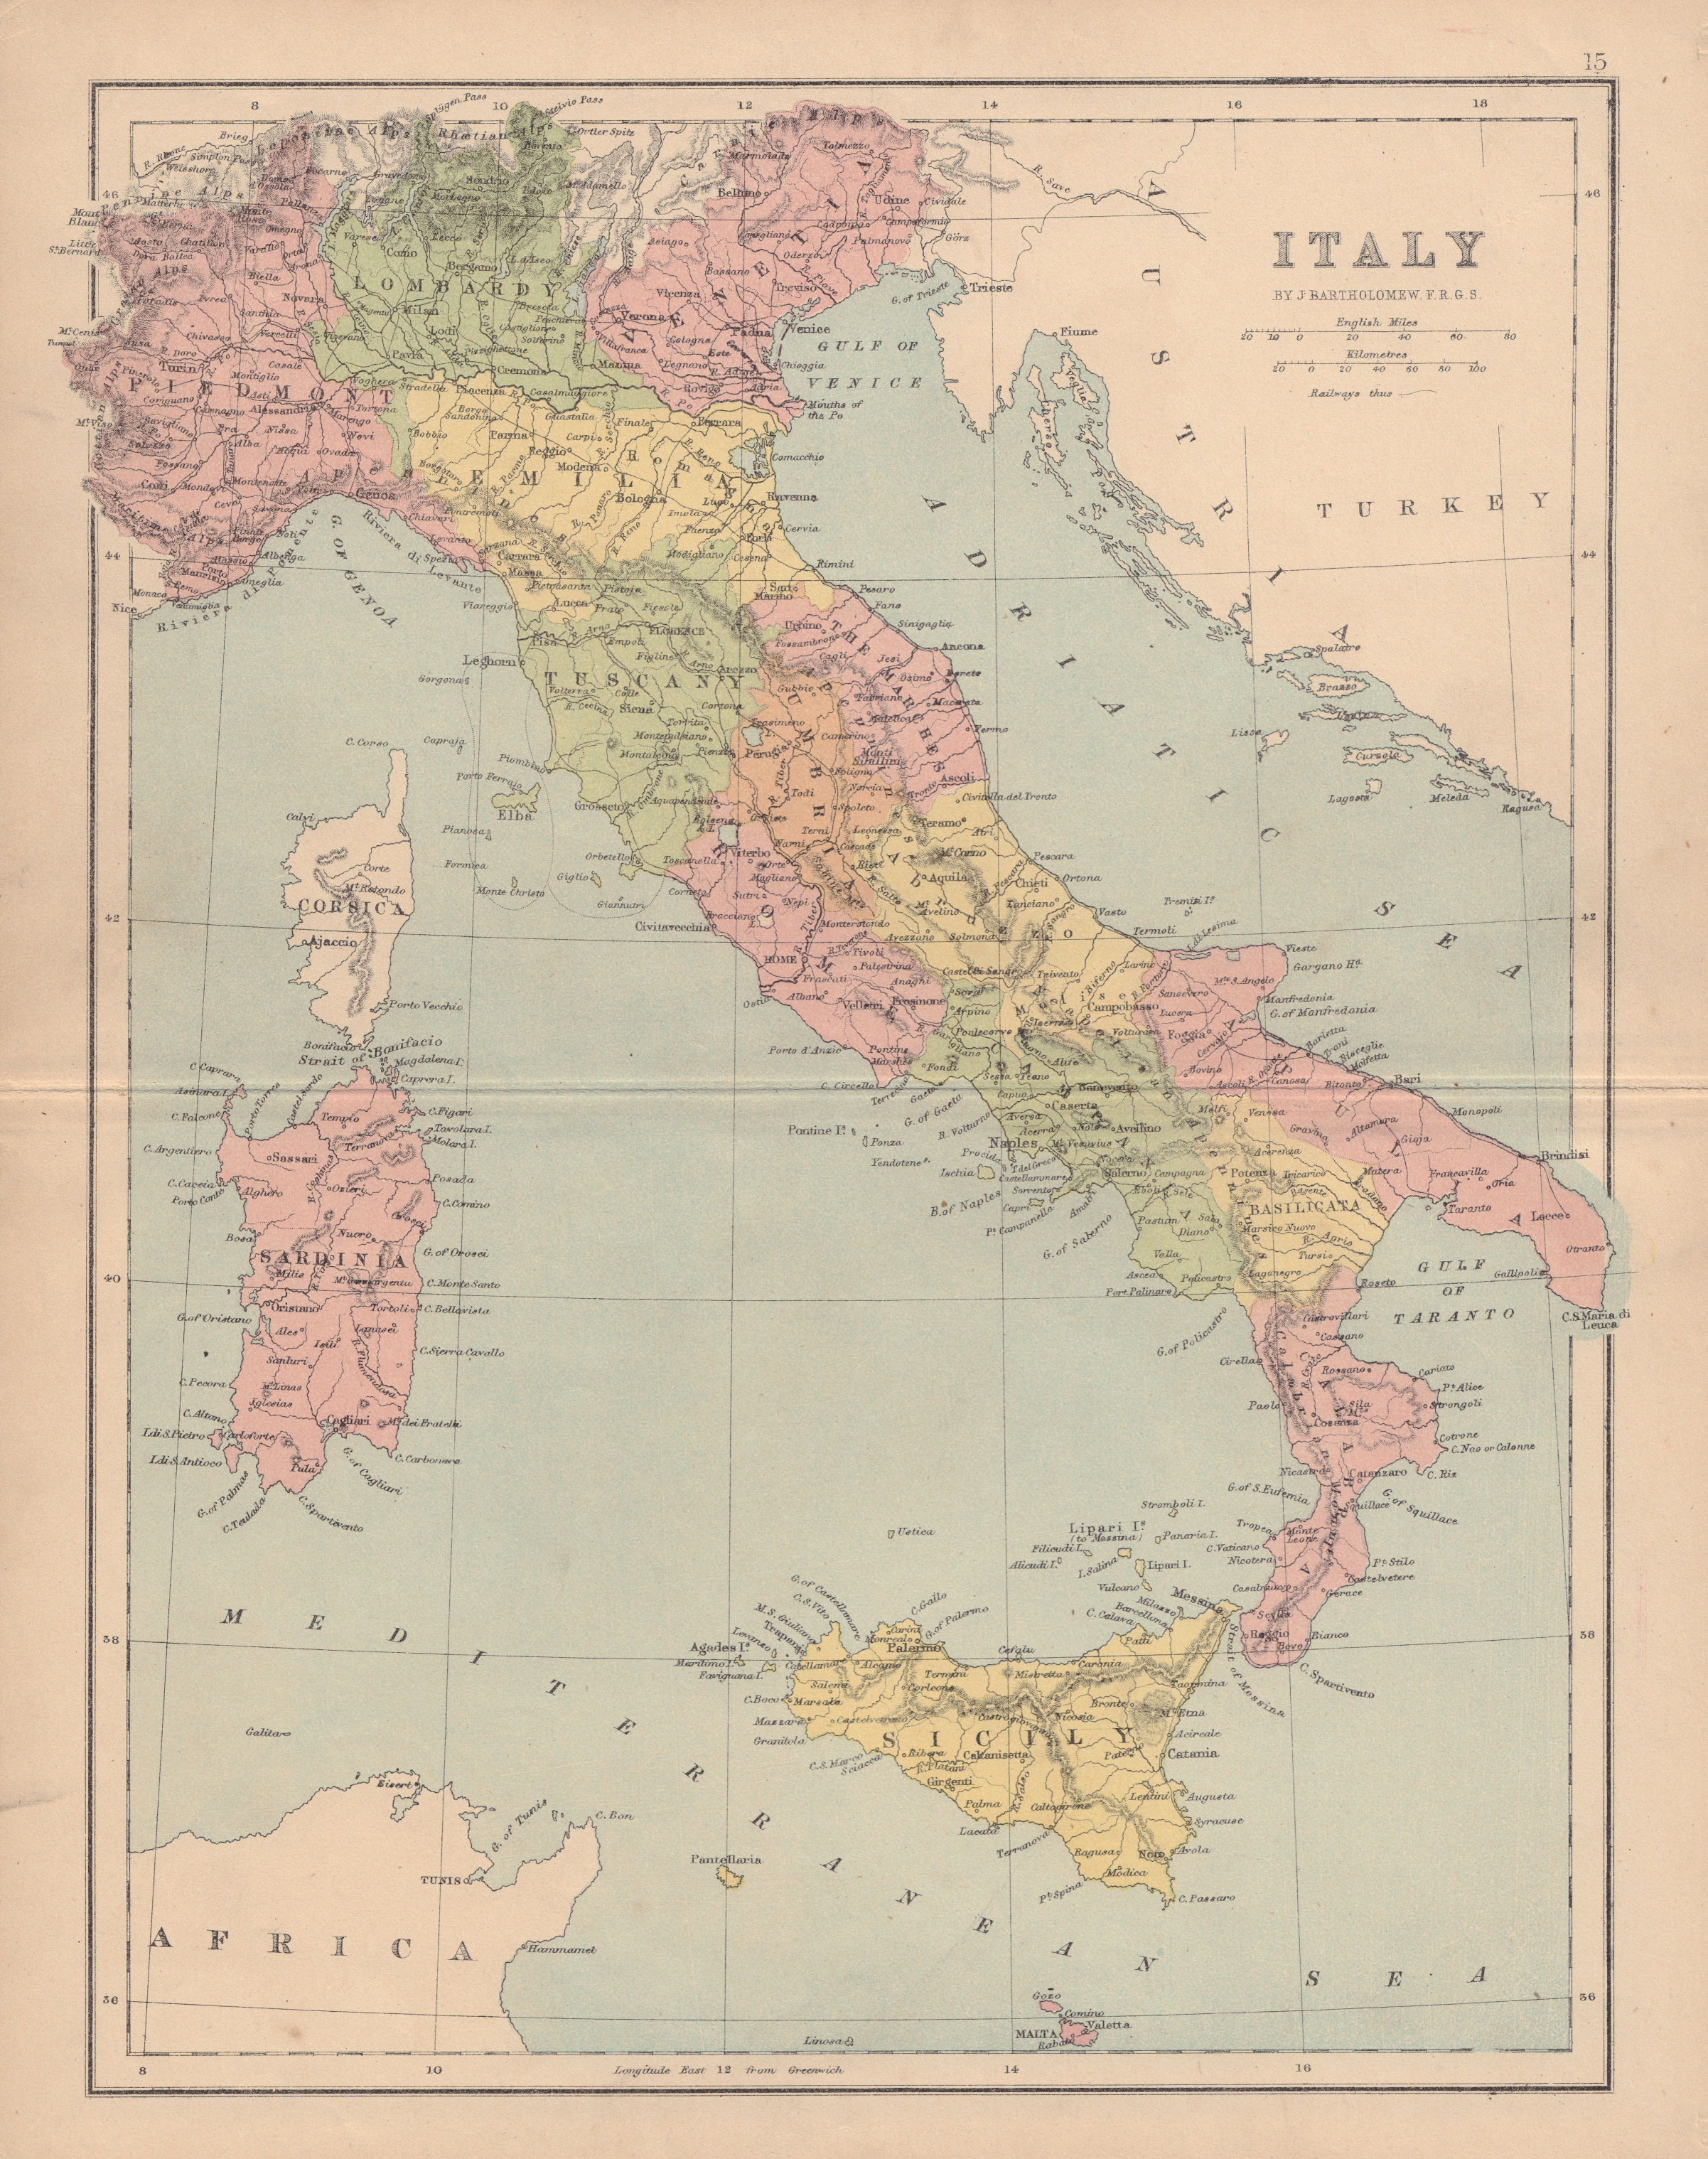 Associate Product ITALY showing regions. Excludes Trieste/Istria & South Tyrol. COLLINS 1873 map